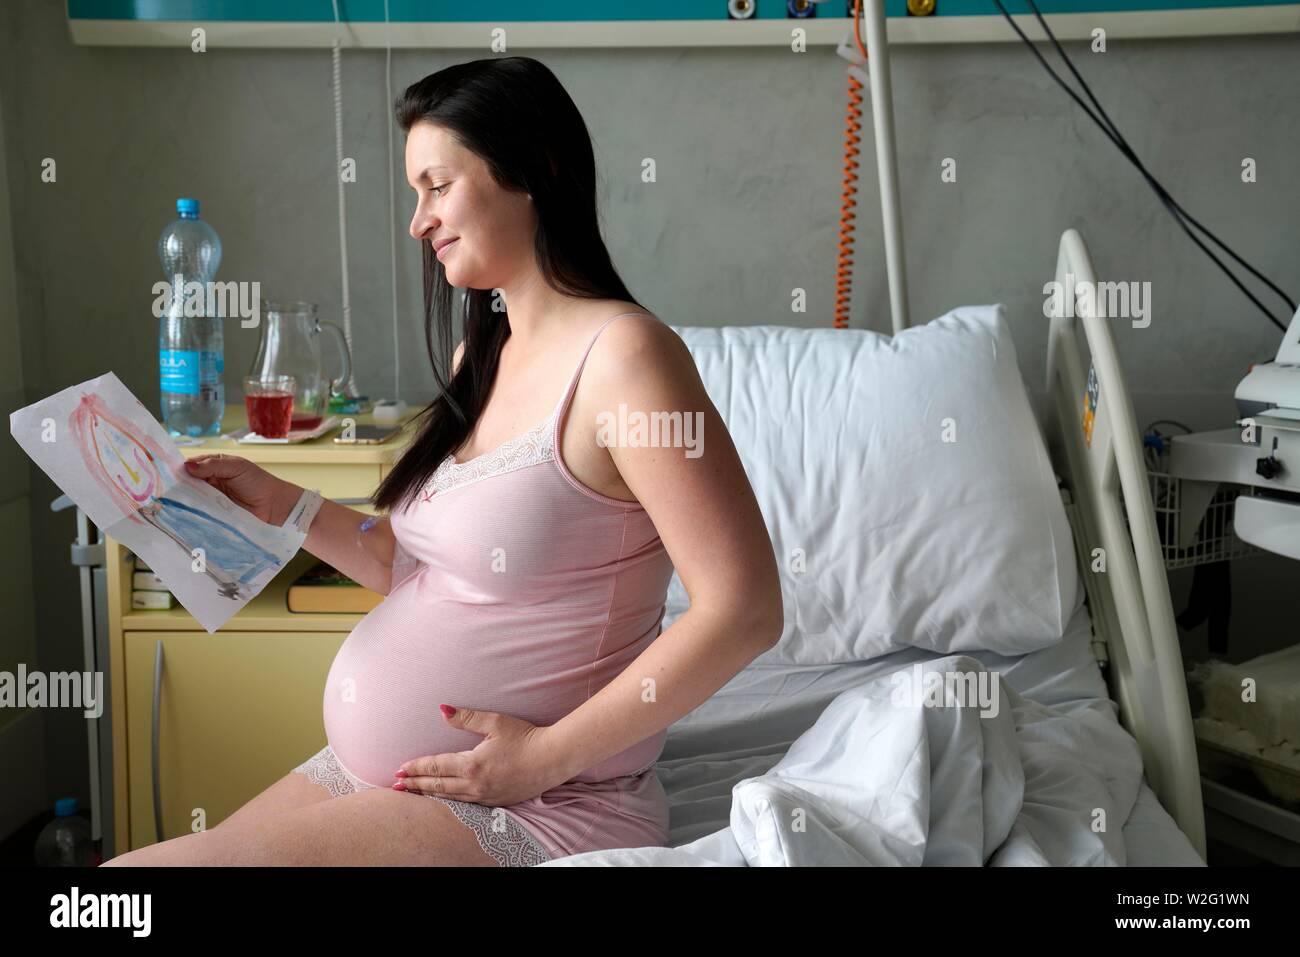 Pregnant woman sitting on sickbed in hospital room with picture of child, high-risk pregnancy, Karlovy Vary, Czech Republic Stock Photo